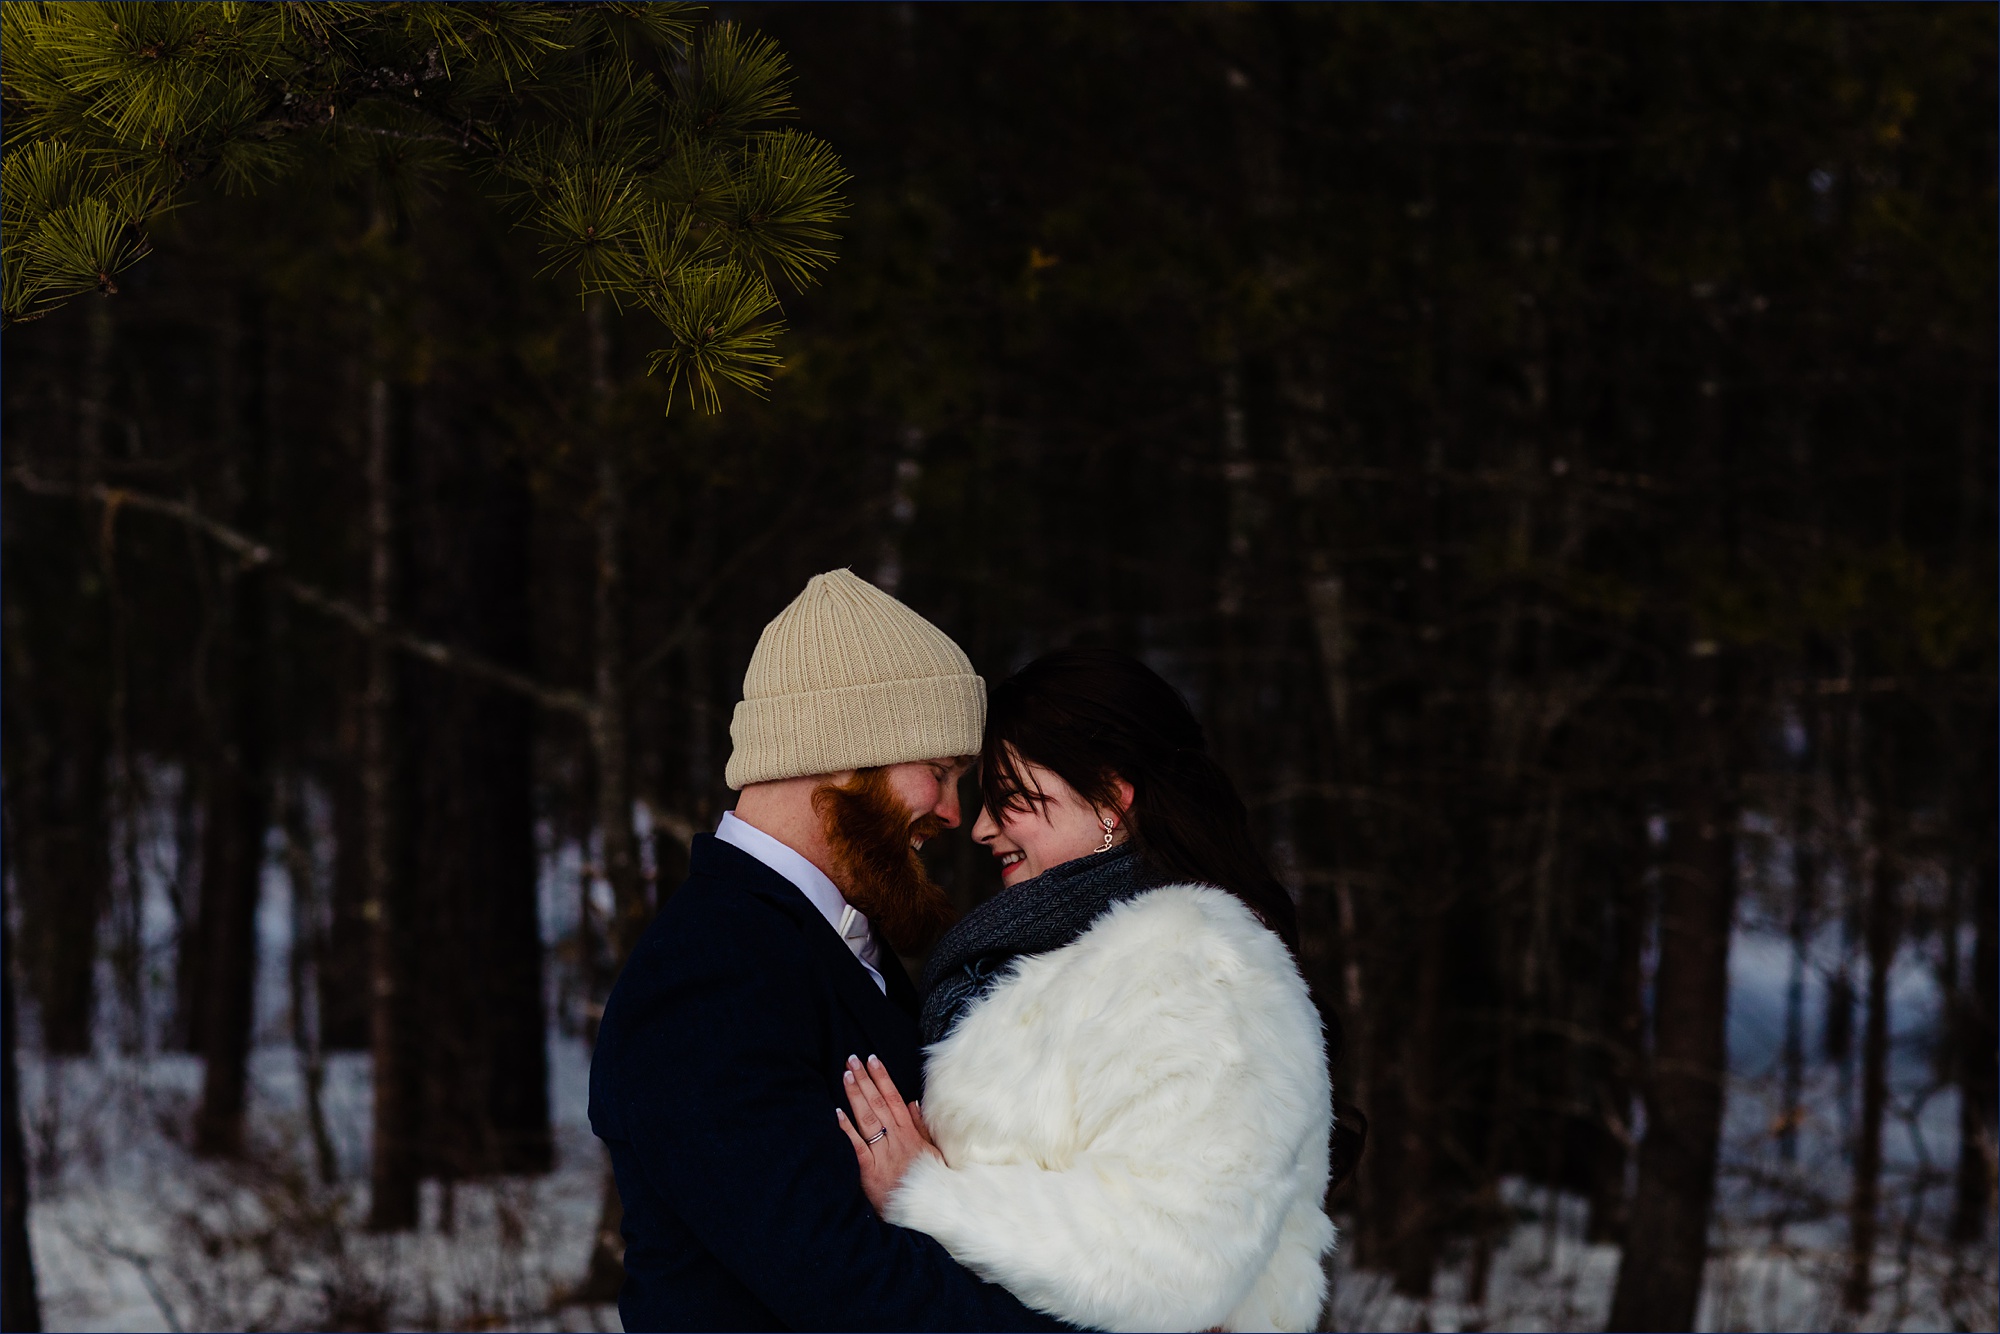 The bride and groom get close together in the wintery woods of NH